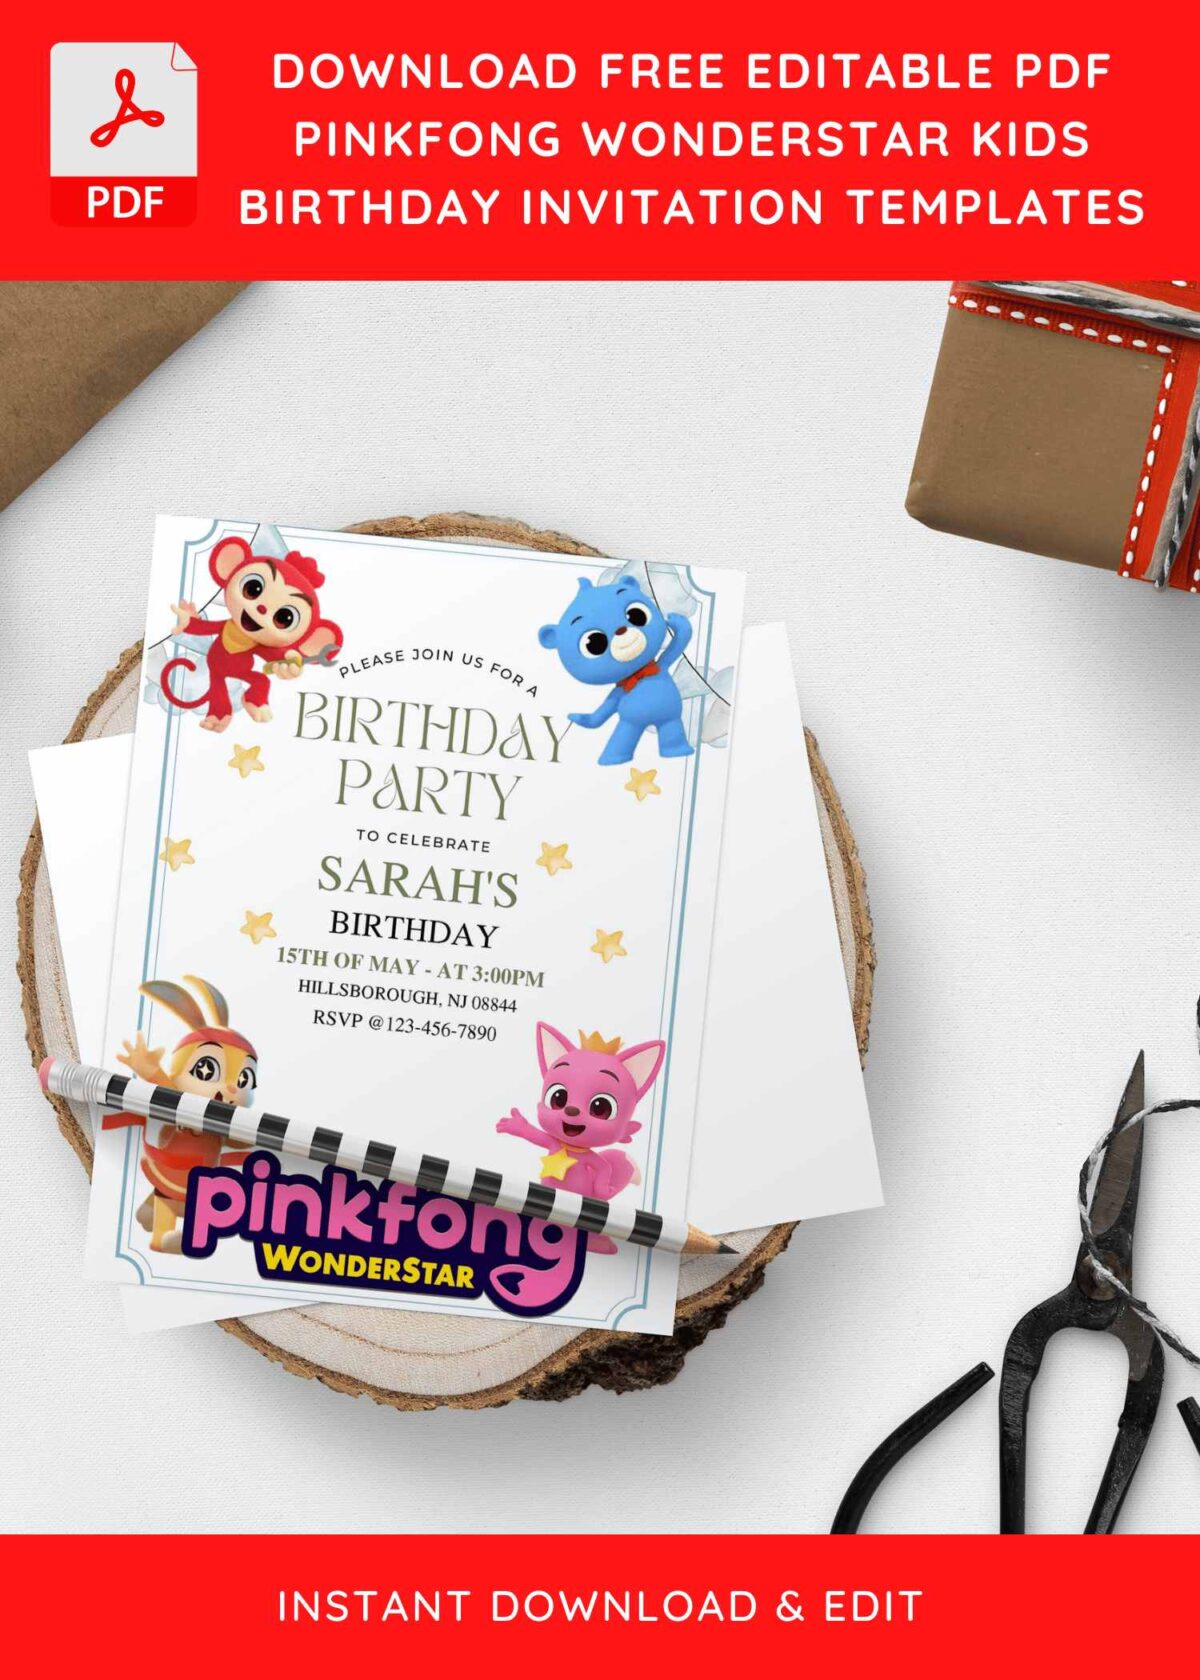 (Free Editable PDF) Adorable Pinkfong Wonderstar Kids Birthday Invitation Templates with cute Monkey and Bunny